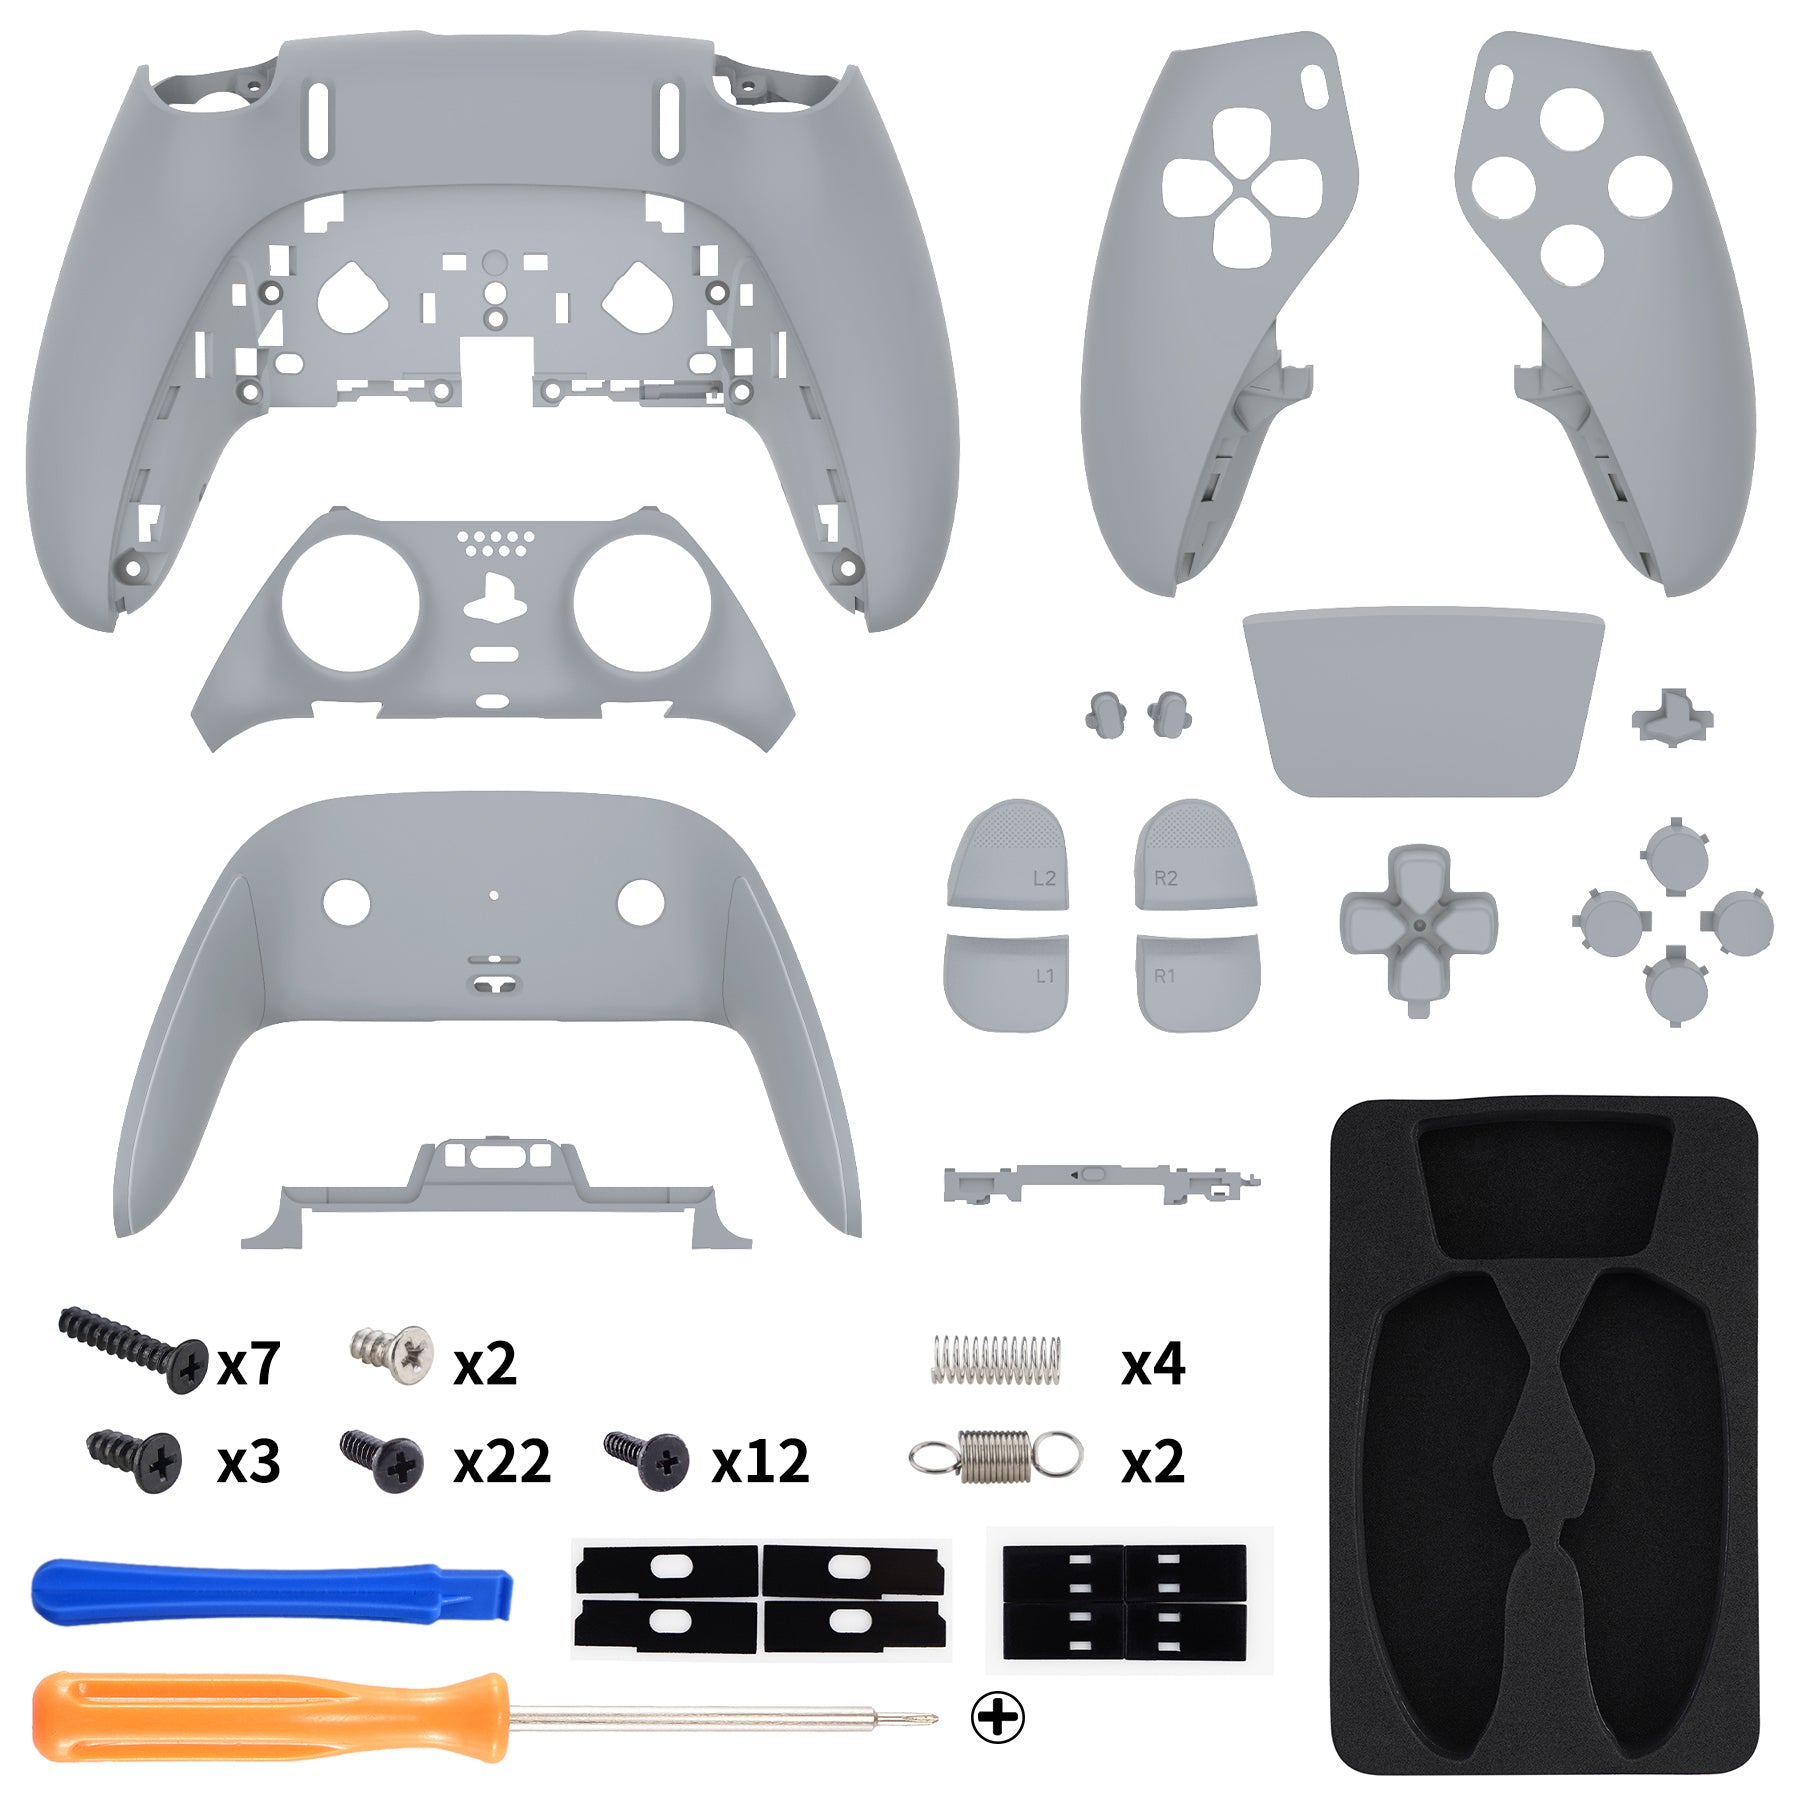 ExtremeRate - Porte Manette PS5 - Gris